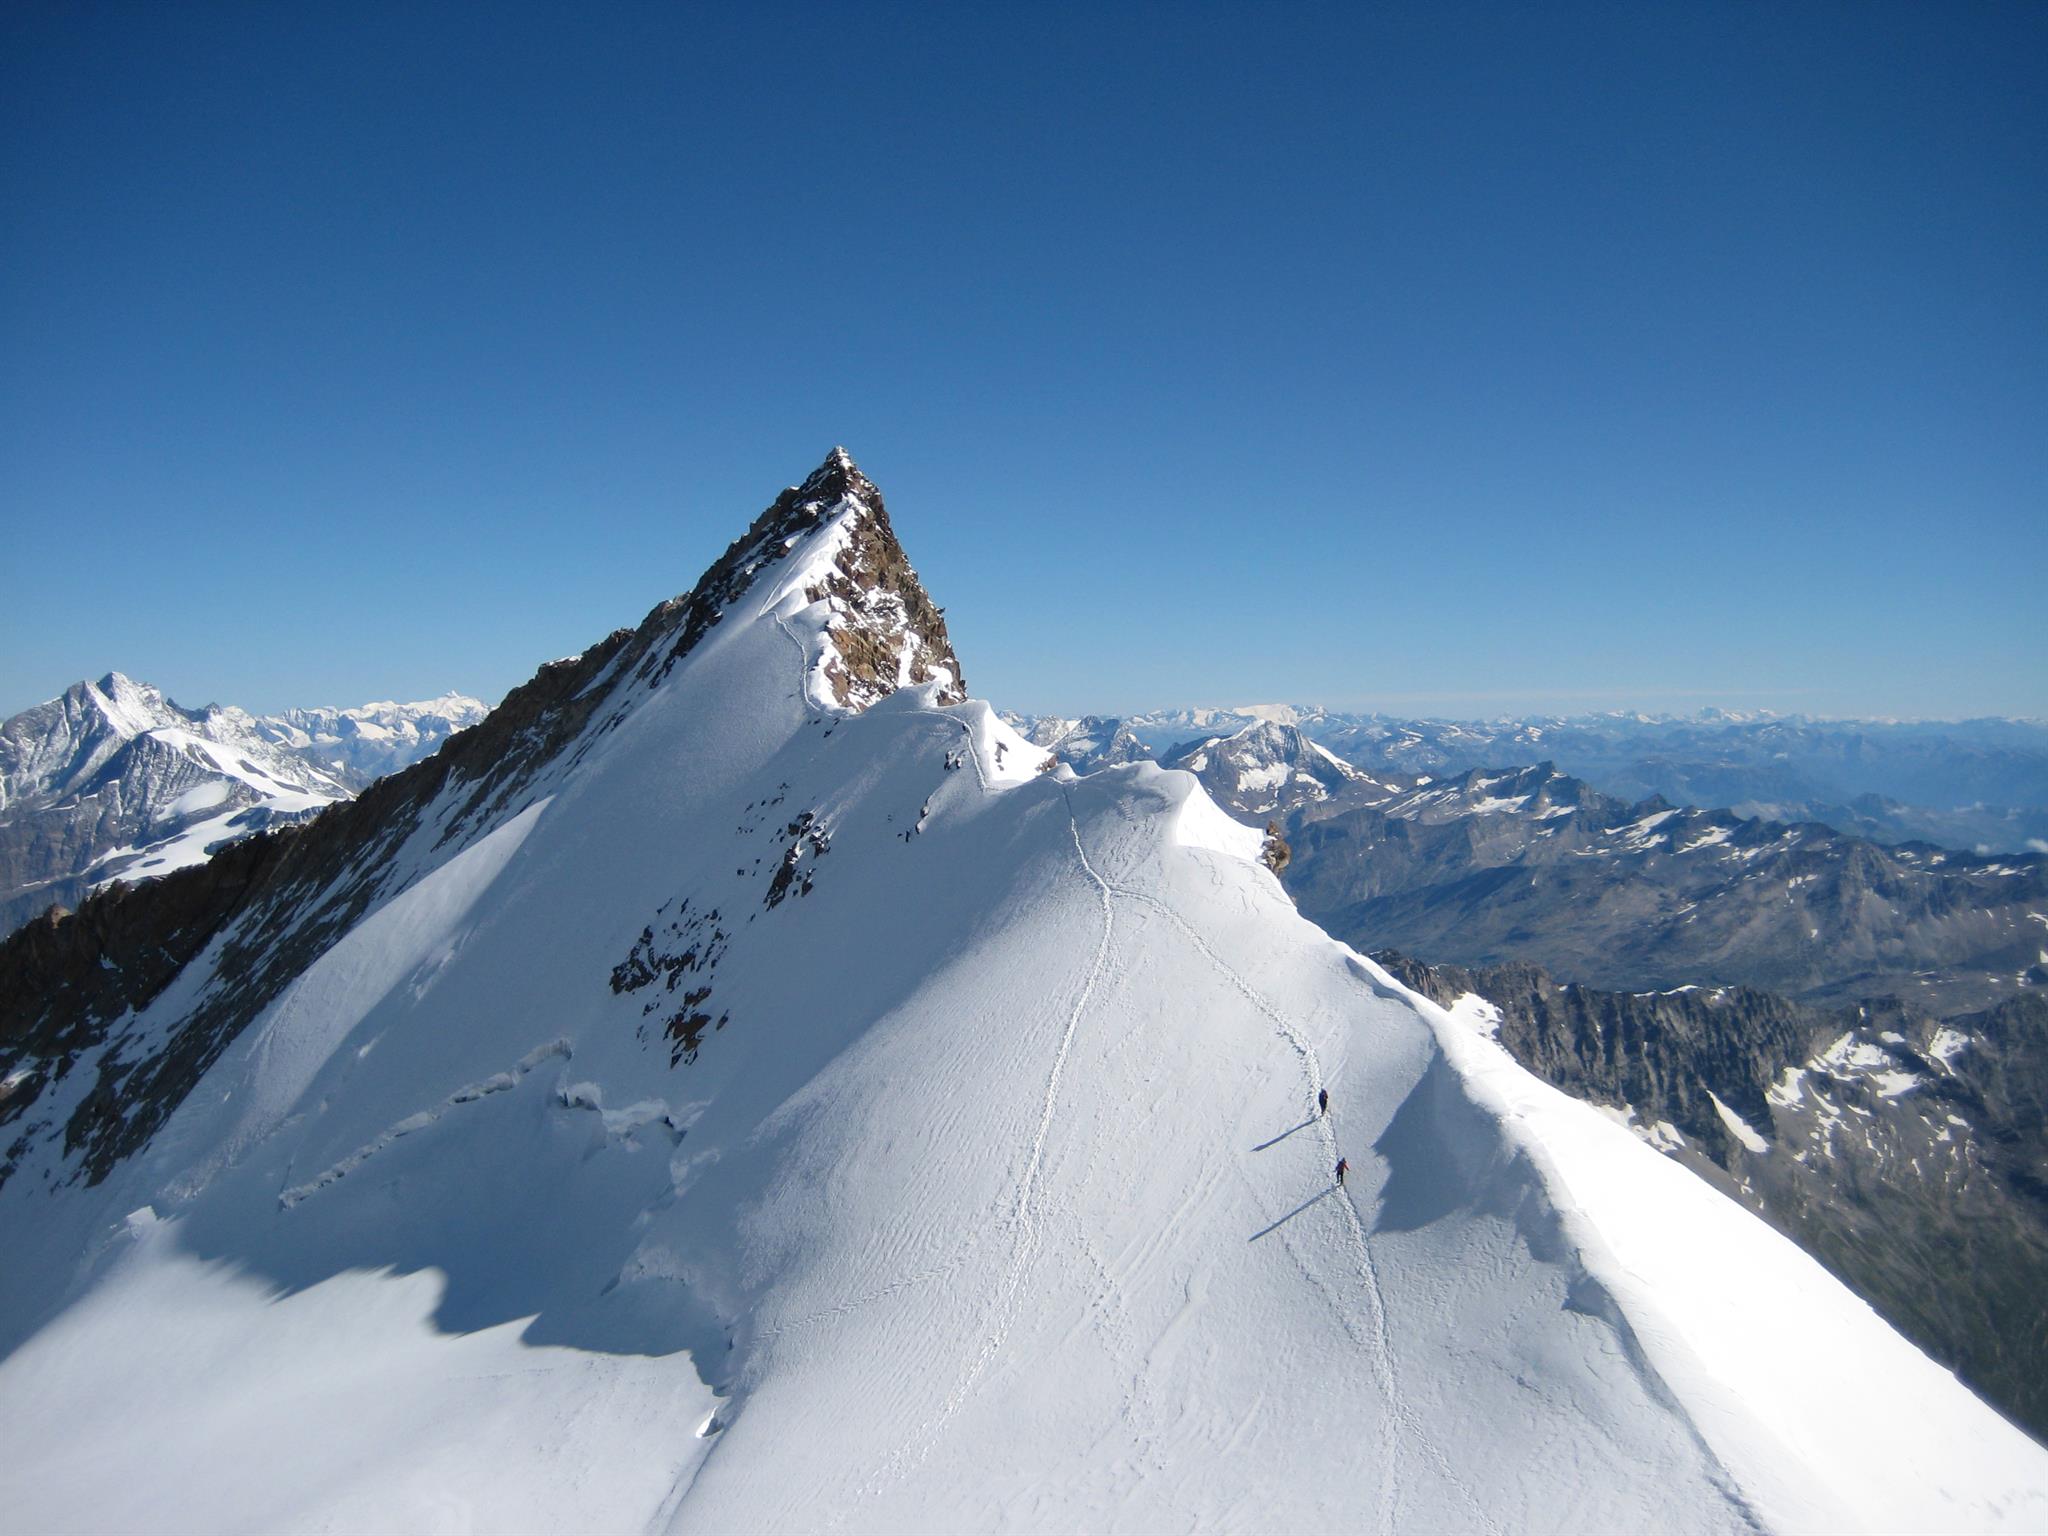 The high mountain in europe is. Норденд. The Alps are High than the Urals.